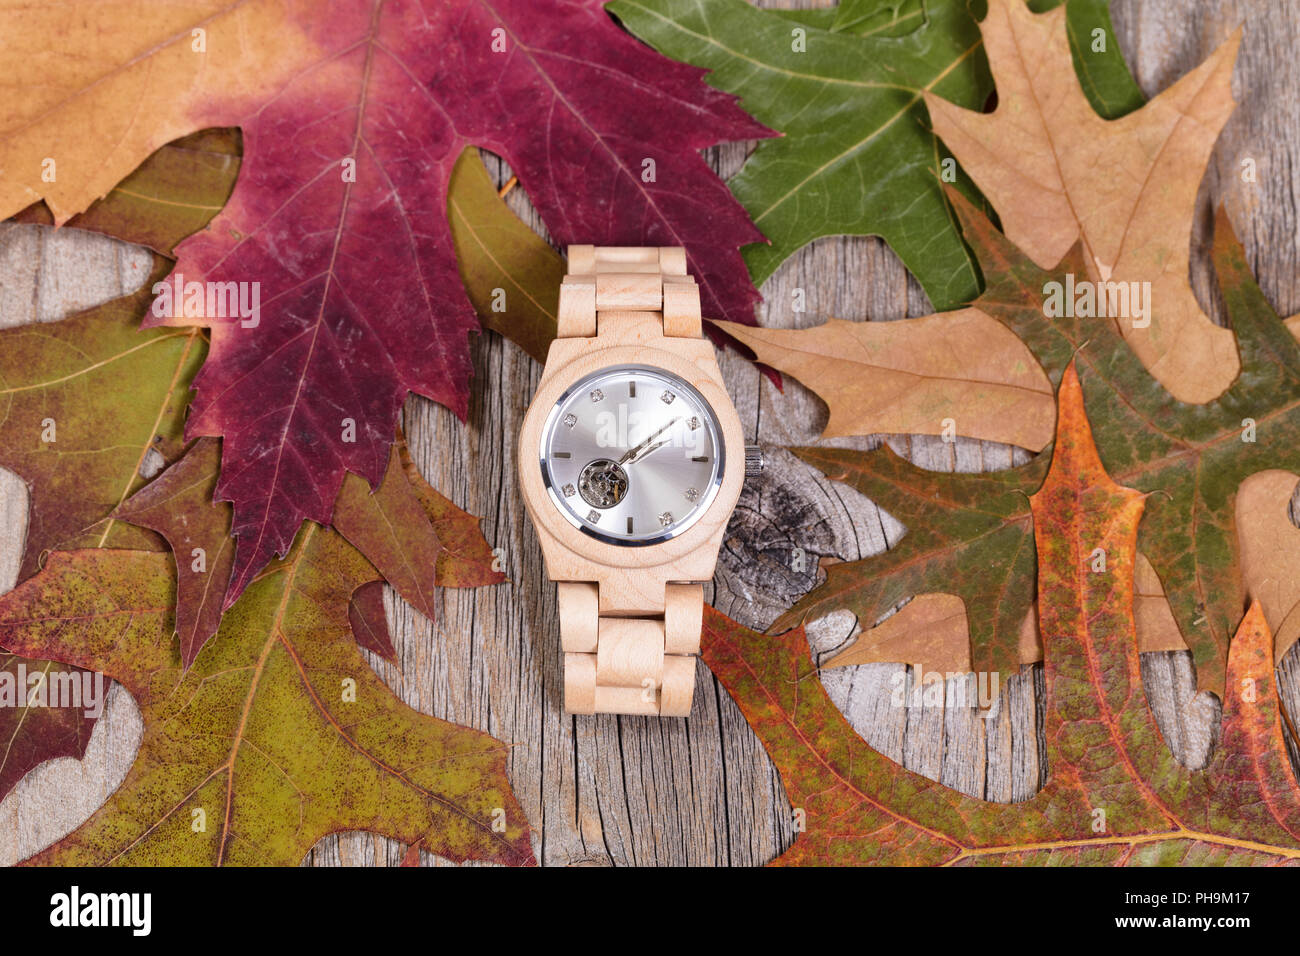 Simple watch lying in autumn leaves and rustic wood background Stock Photo